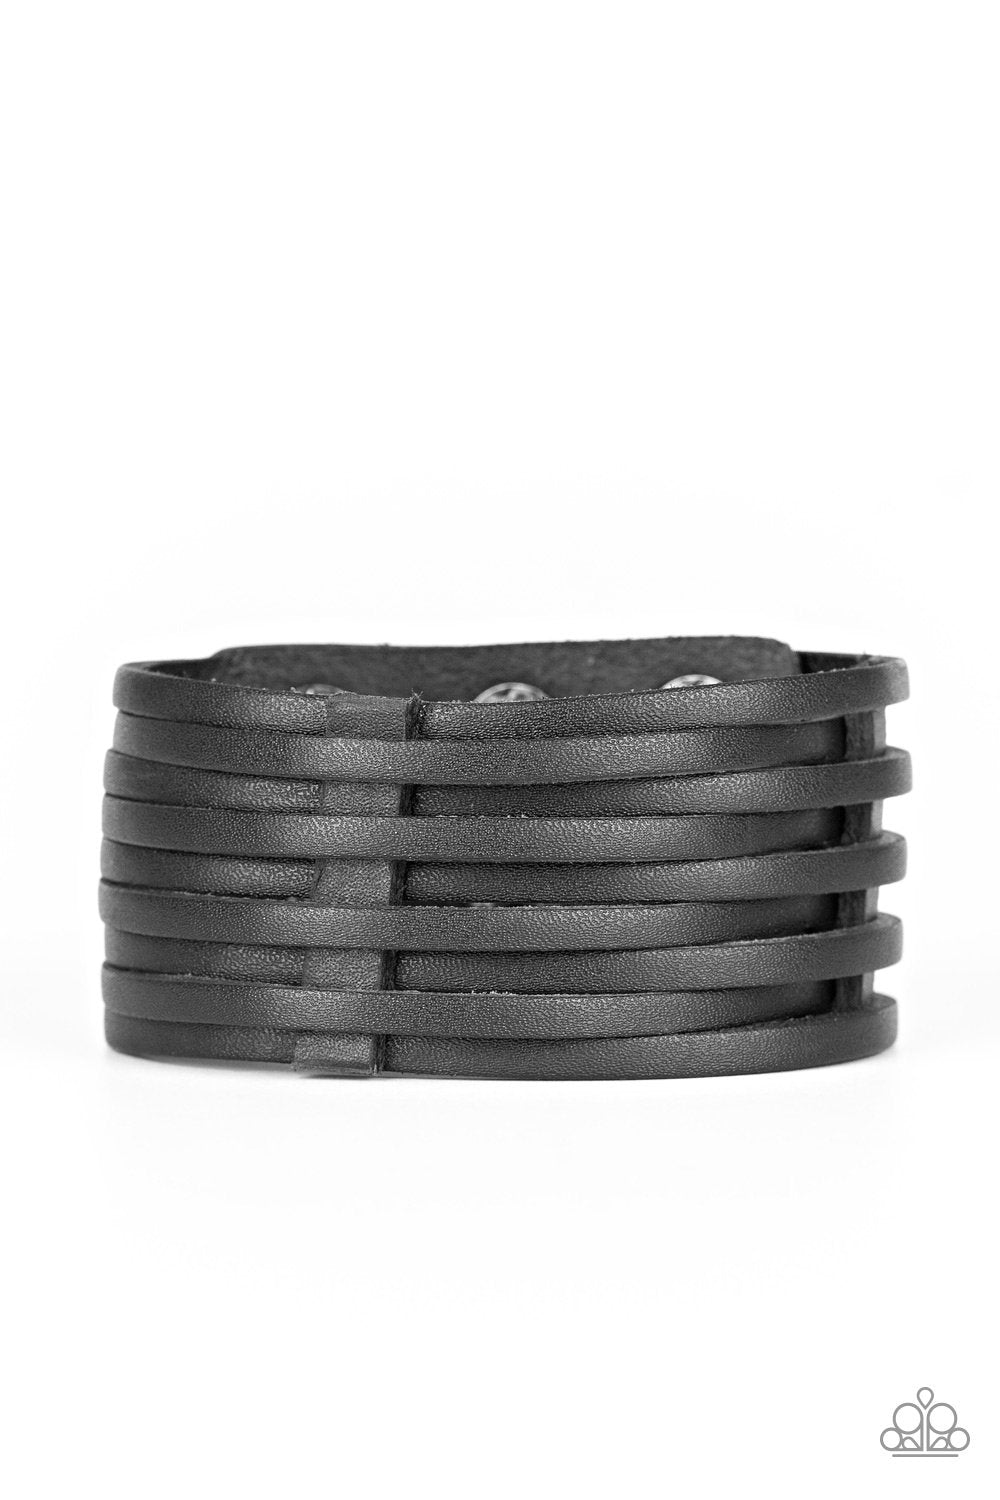 The Starting Lineup Men's Black Leather Wrap Snap Bracelet - Paparazzi Accessories-CarasShop.com - $5 Jewelry by Cara Jewels